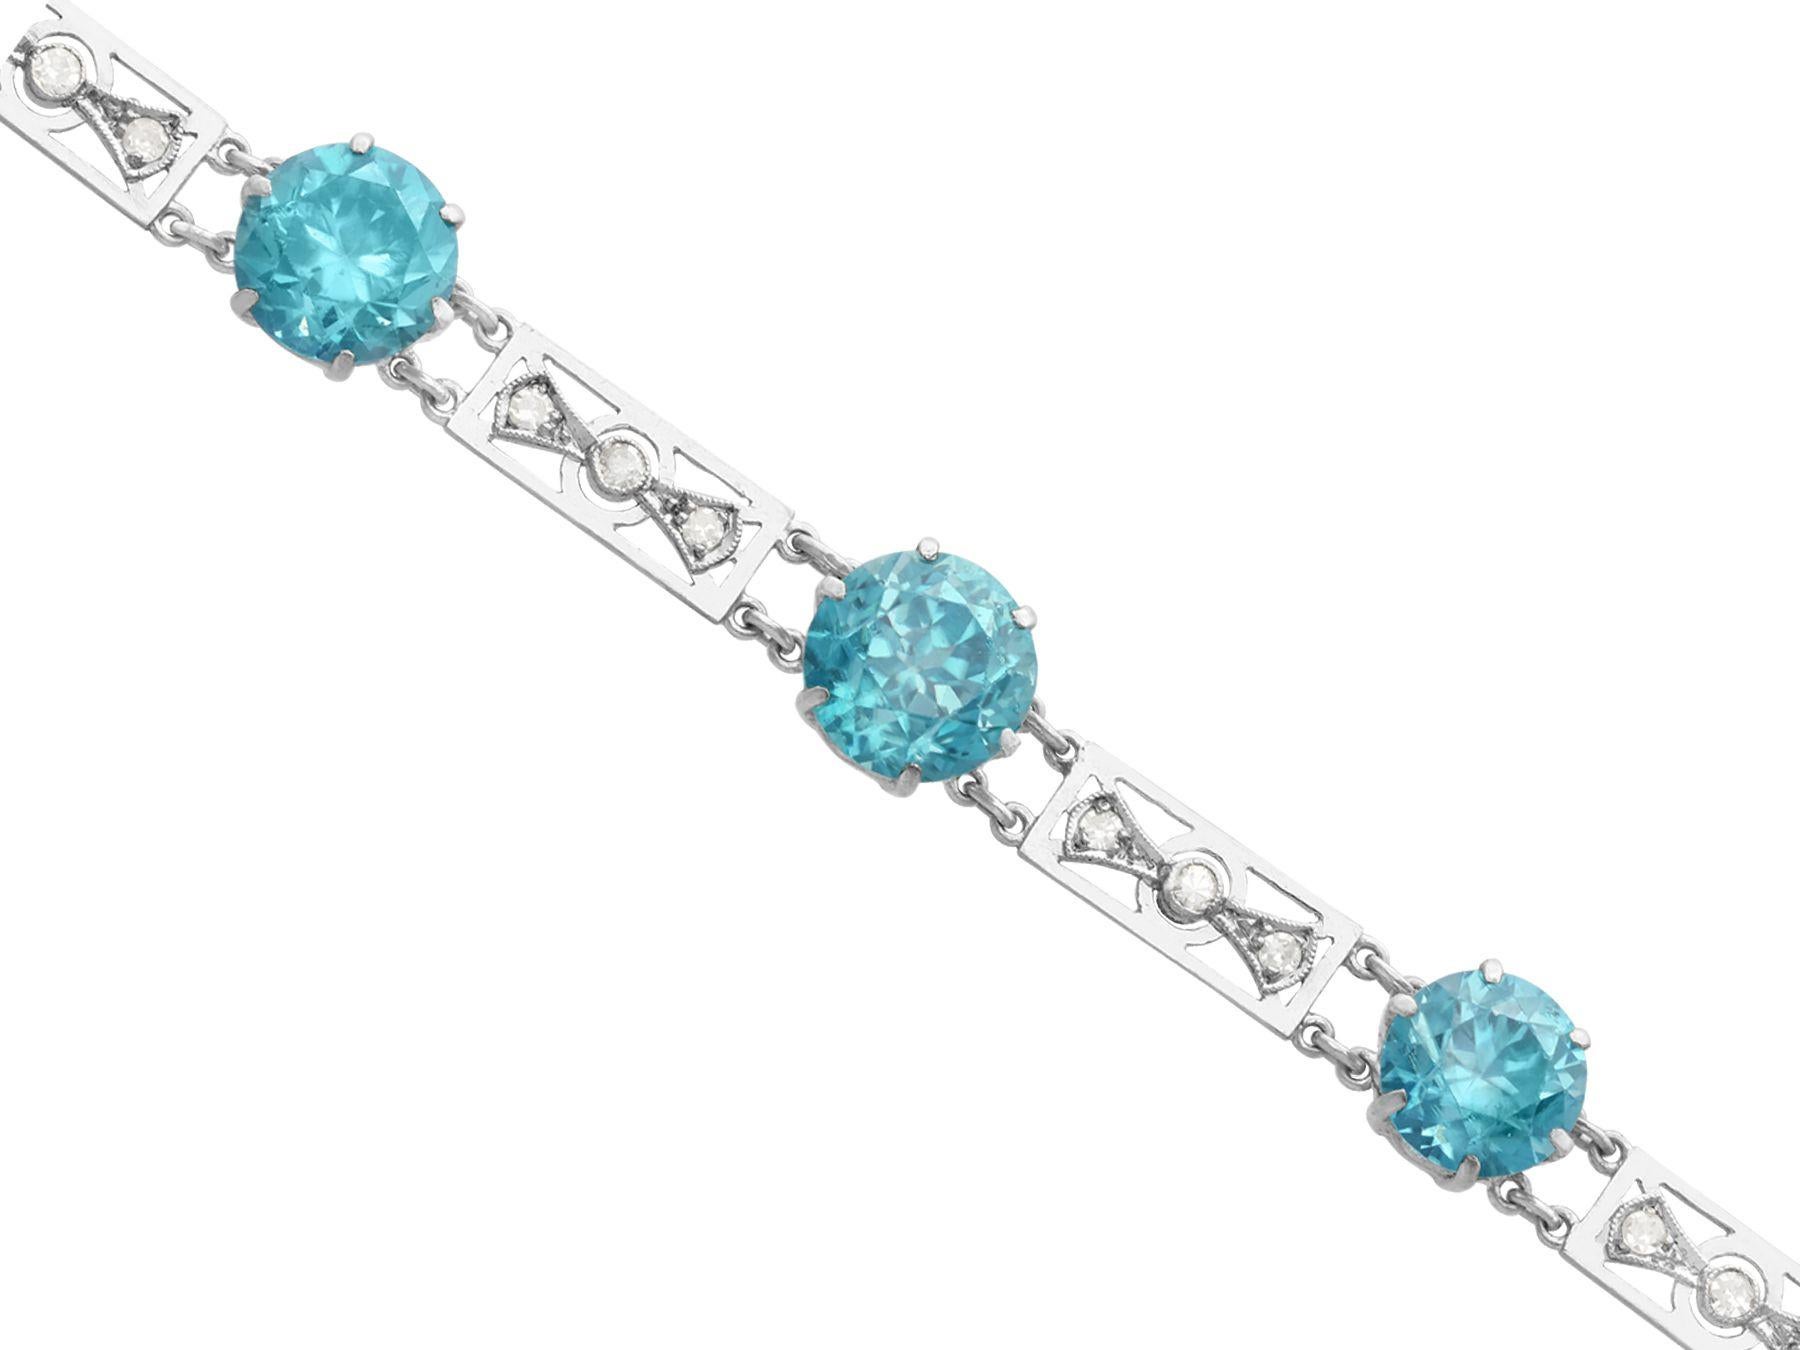 A fine and impressive antique 19.61 carat natural blue zircon and 0.45 carat diamond, 9 karat white gold bracelet; part of our antique jewelry and estate jewelry collections

This stunning, fine and impressive blue zircon bracelet has been crafted